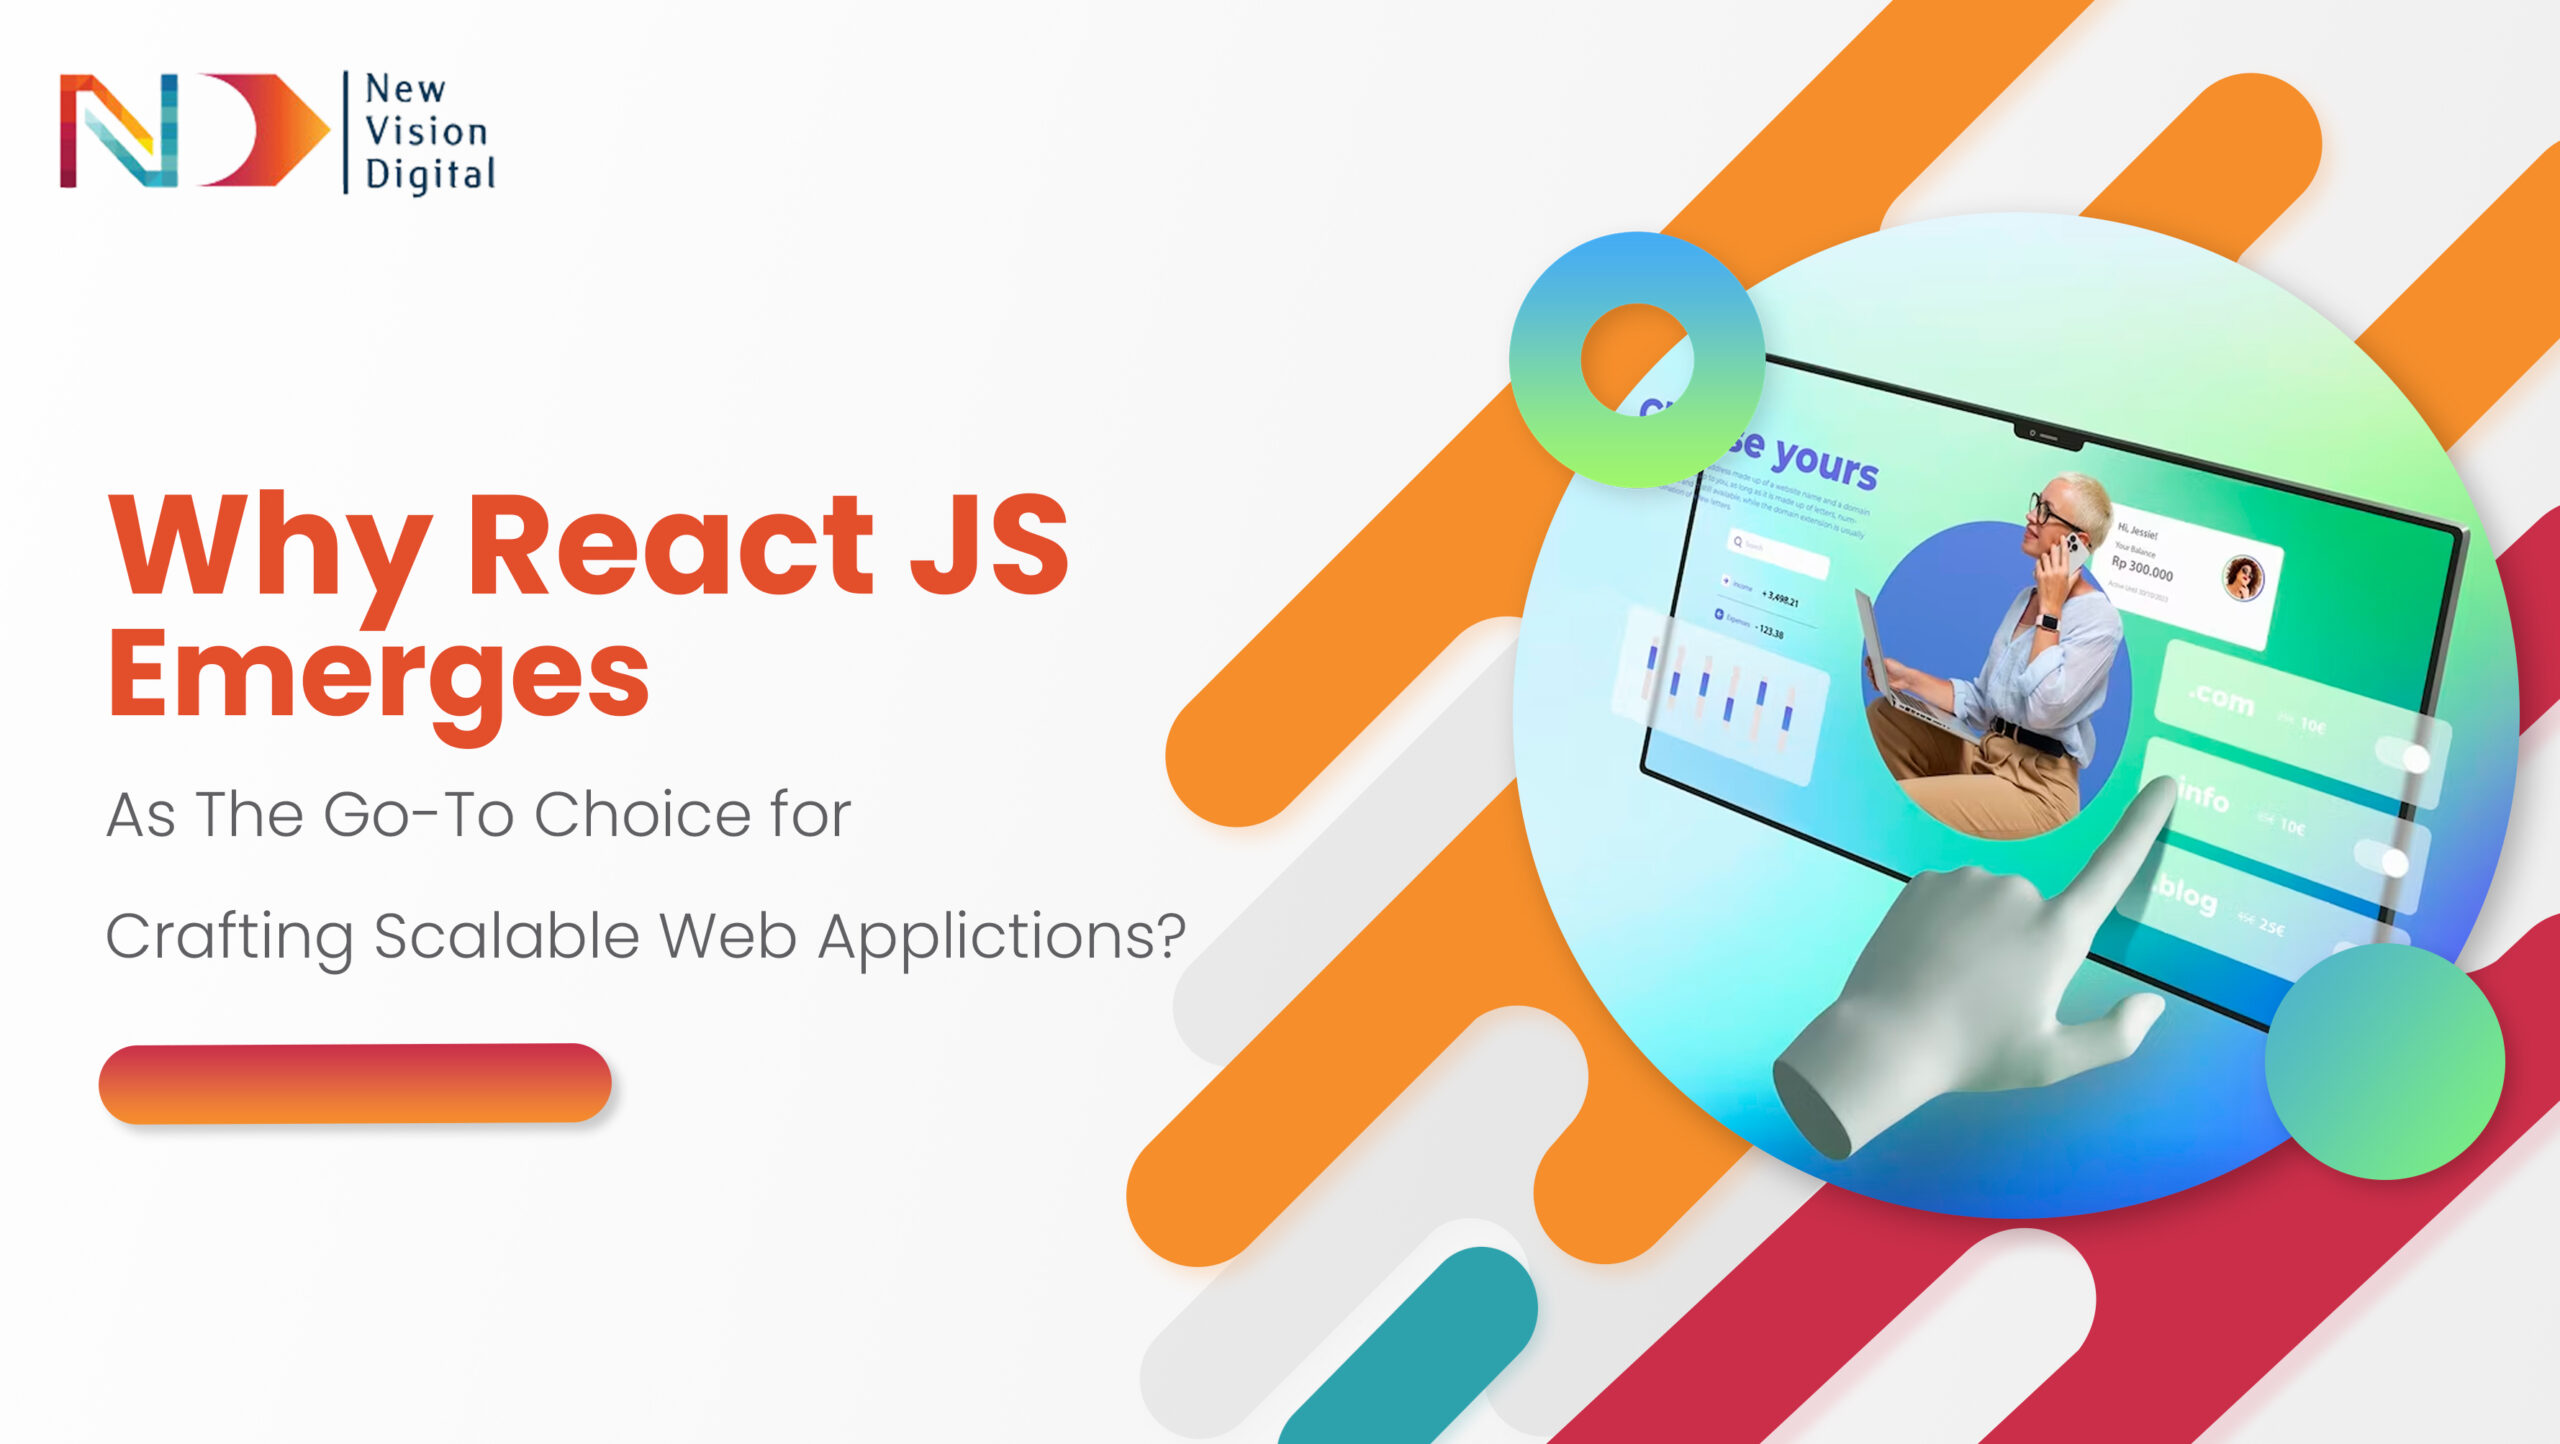 Why ReactJS Emerges as the Go-To Choice for Crafting Scalable Web Applications?